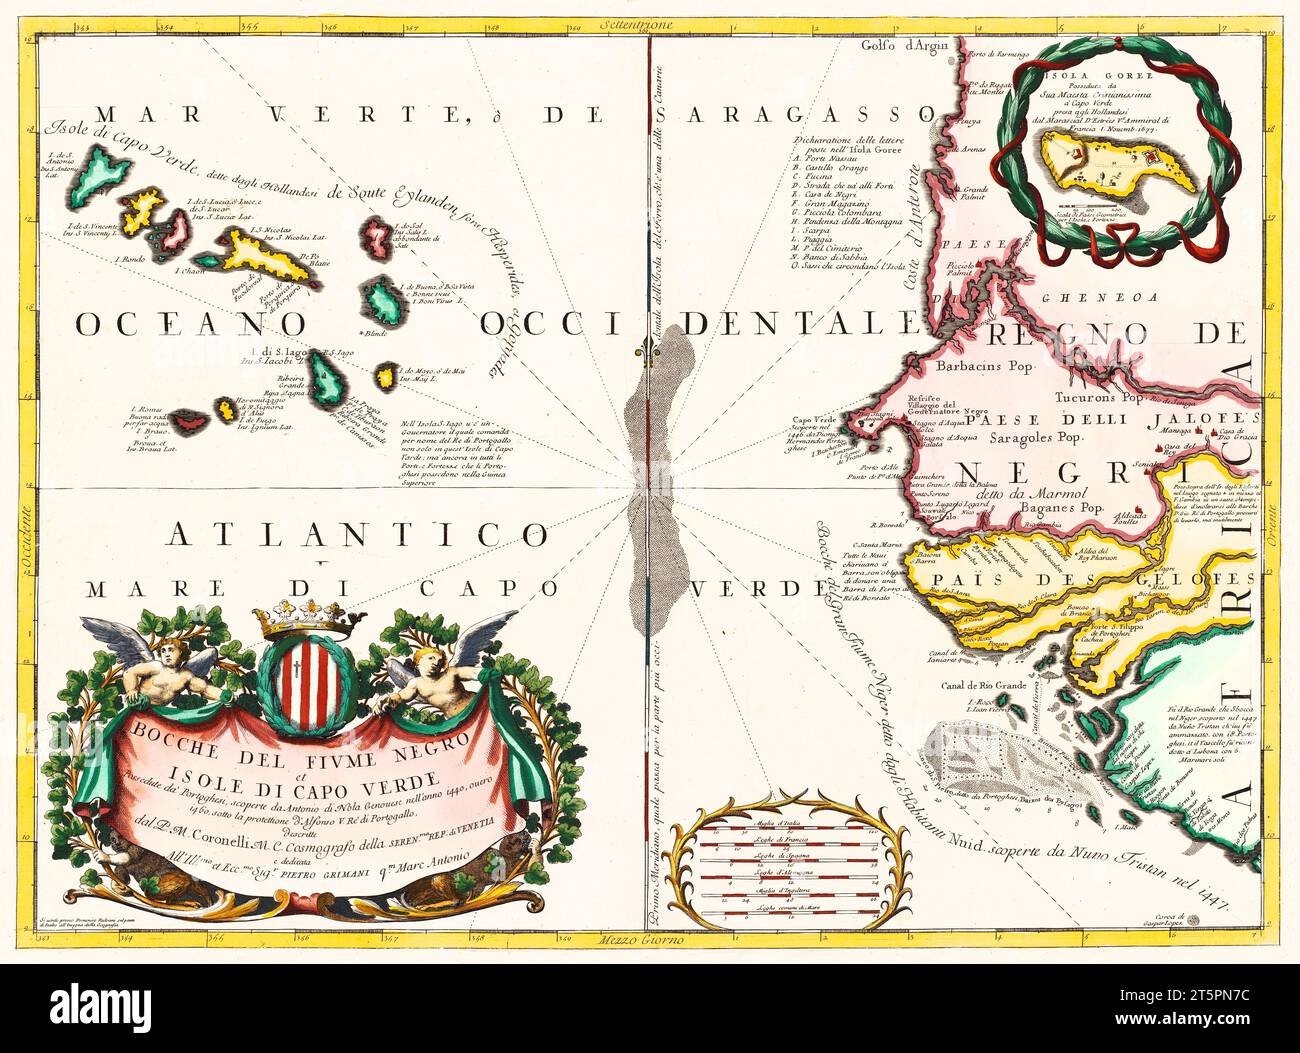 Old map of Cape Verde Archipelago and Africa north western coast. By Bellin, publ. in 1746 Stock Photo